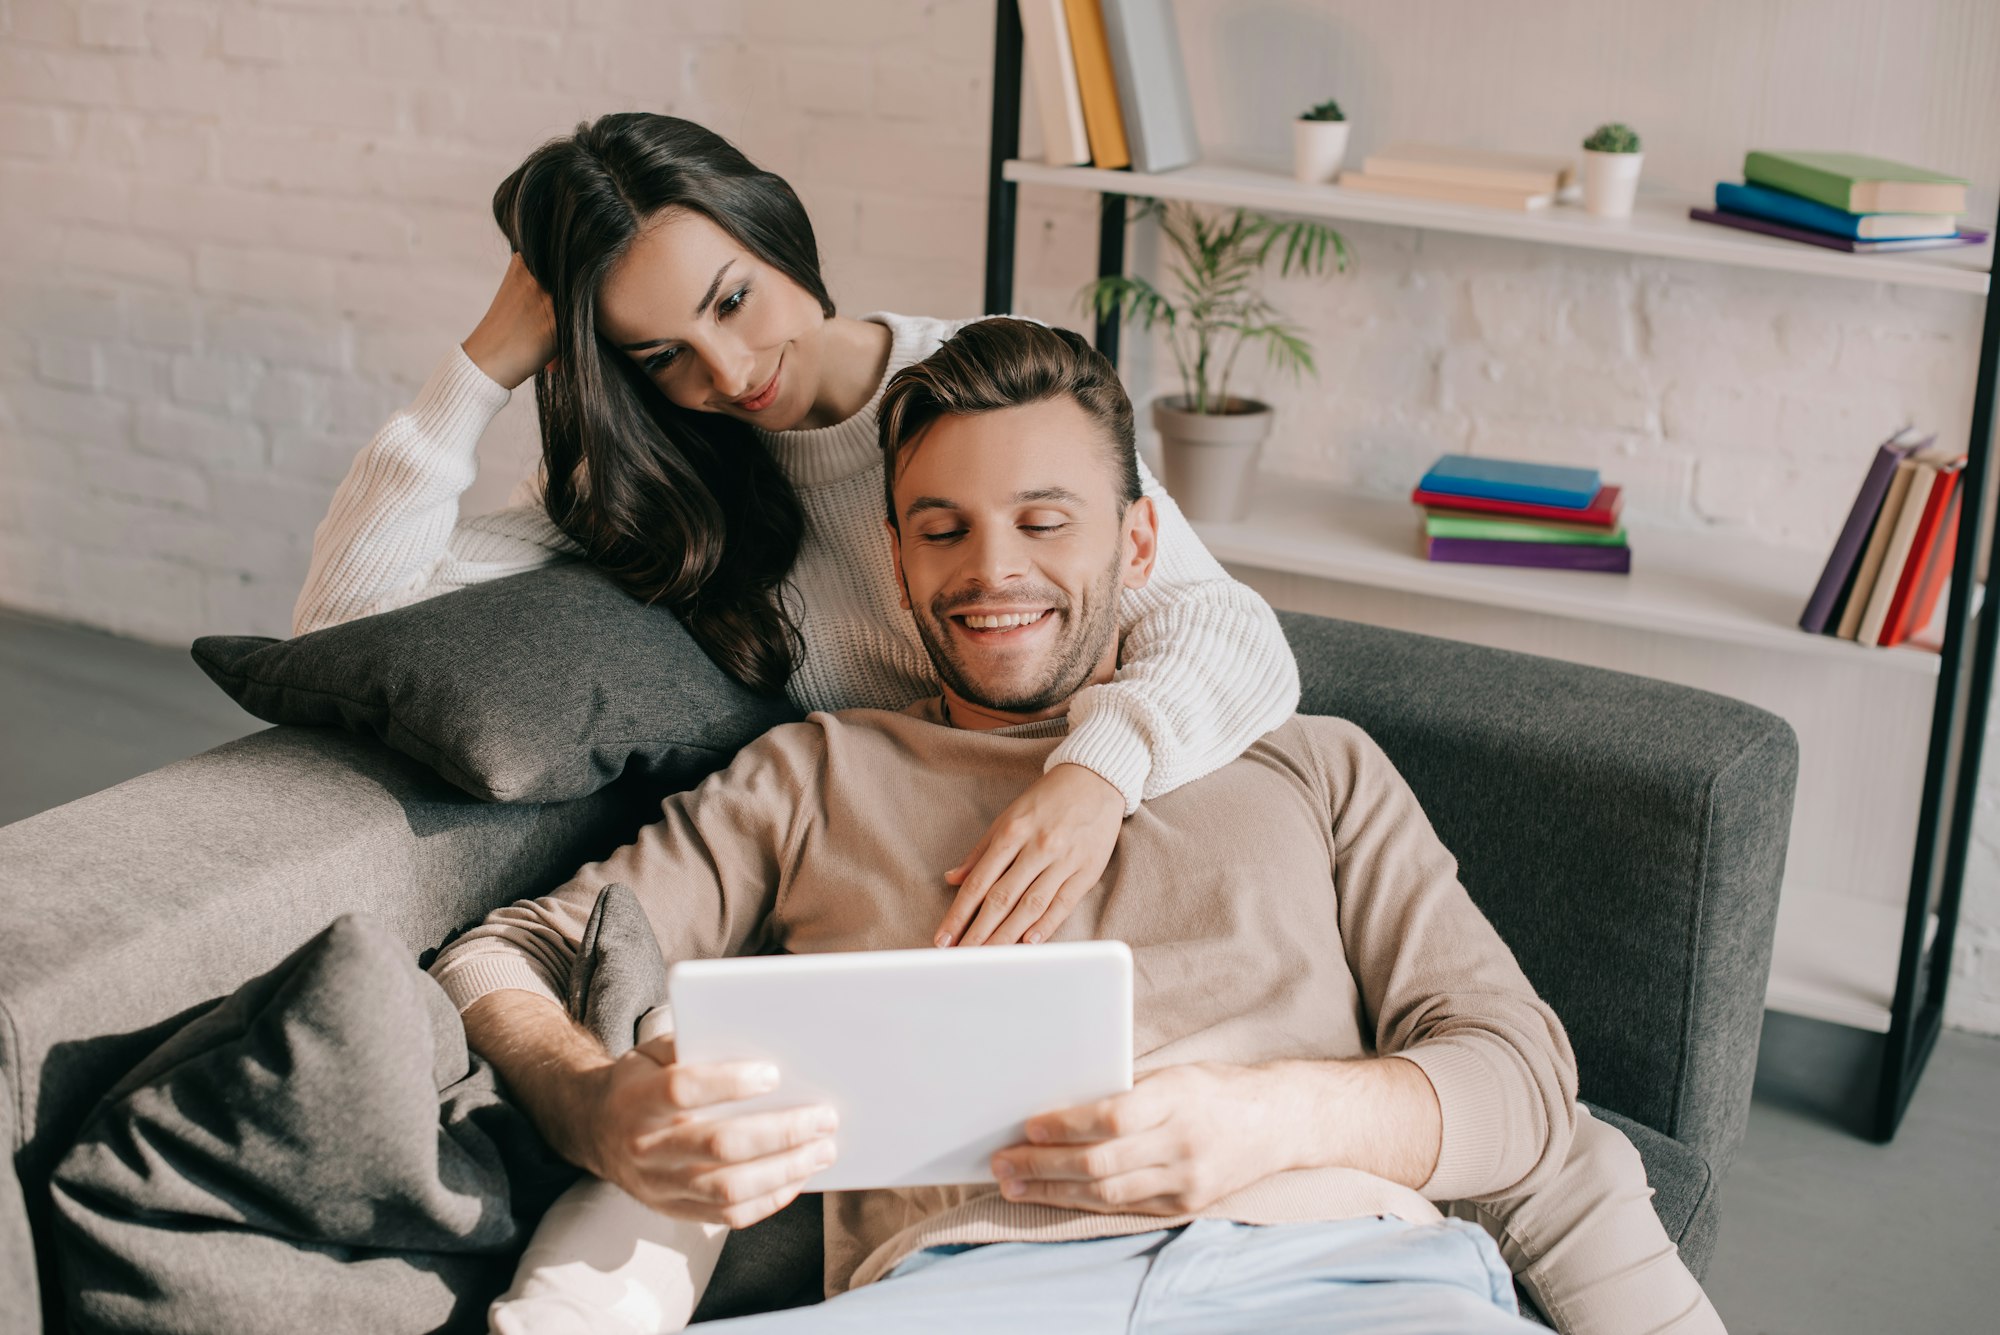 smiling young couple using tablet together on sofa at home